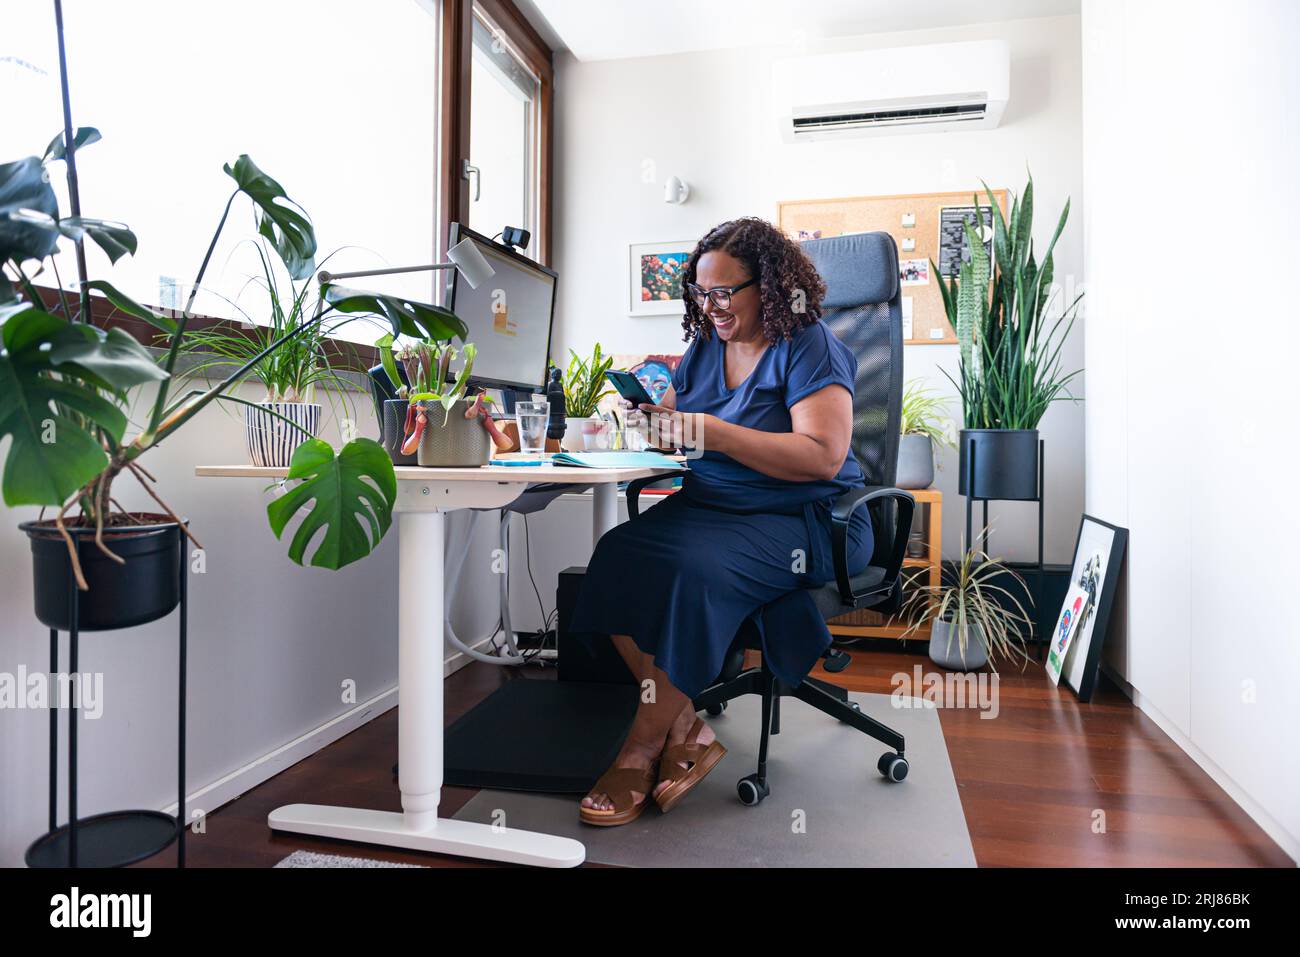 Beautiful oversize black woman smiling while looking into her mobile screen in her home office decorated with plants Stock Photo